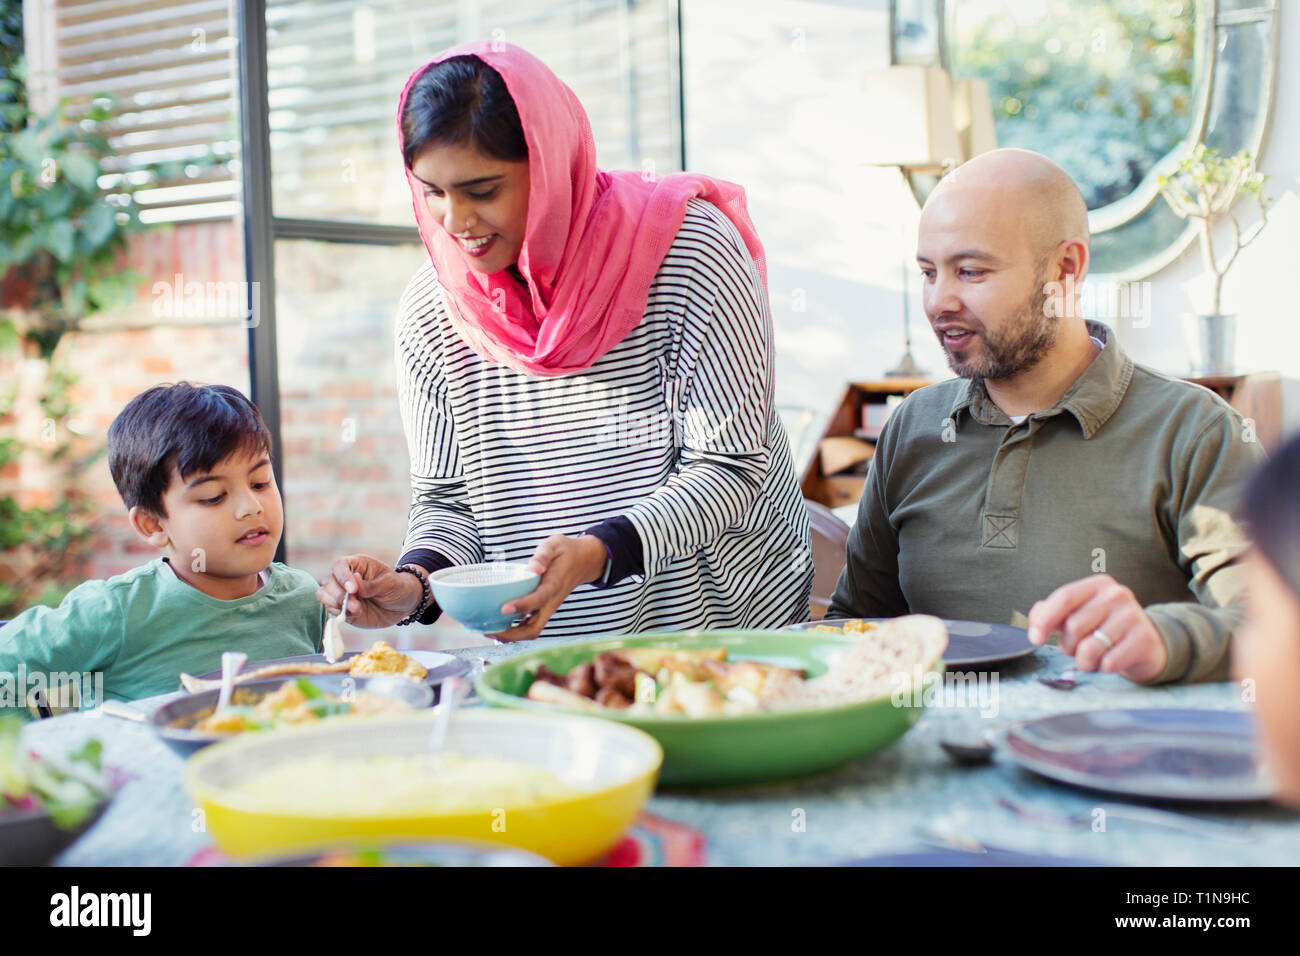 Mother in hijab serving dinner to family at table Stock Photo